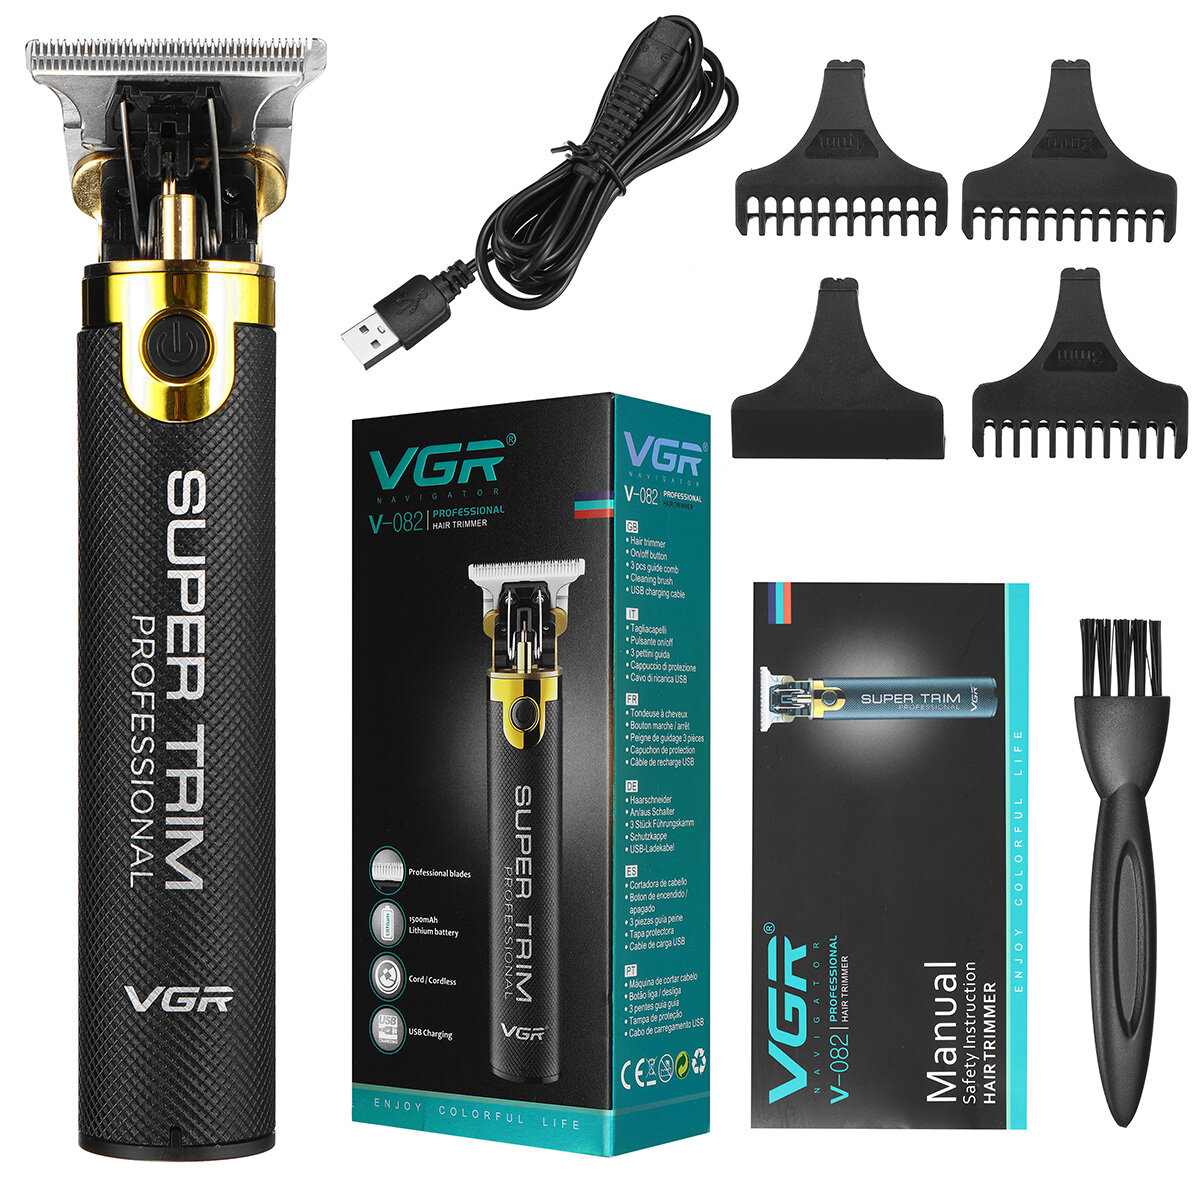 

V082 Electric Hair Clipper Shaver Trimmer USB Rechargeable Professional Barber Hair Trimming Machine with 4 Limited Comb